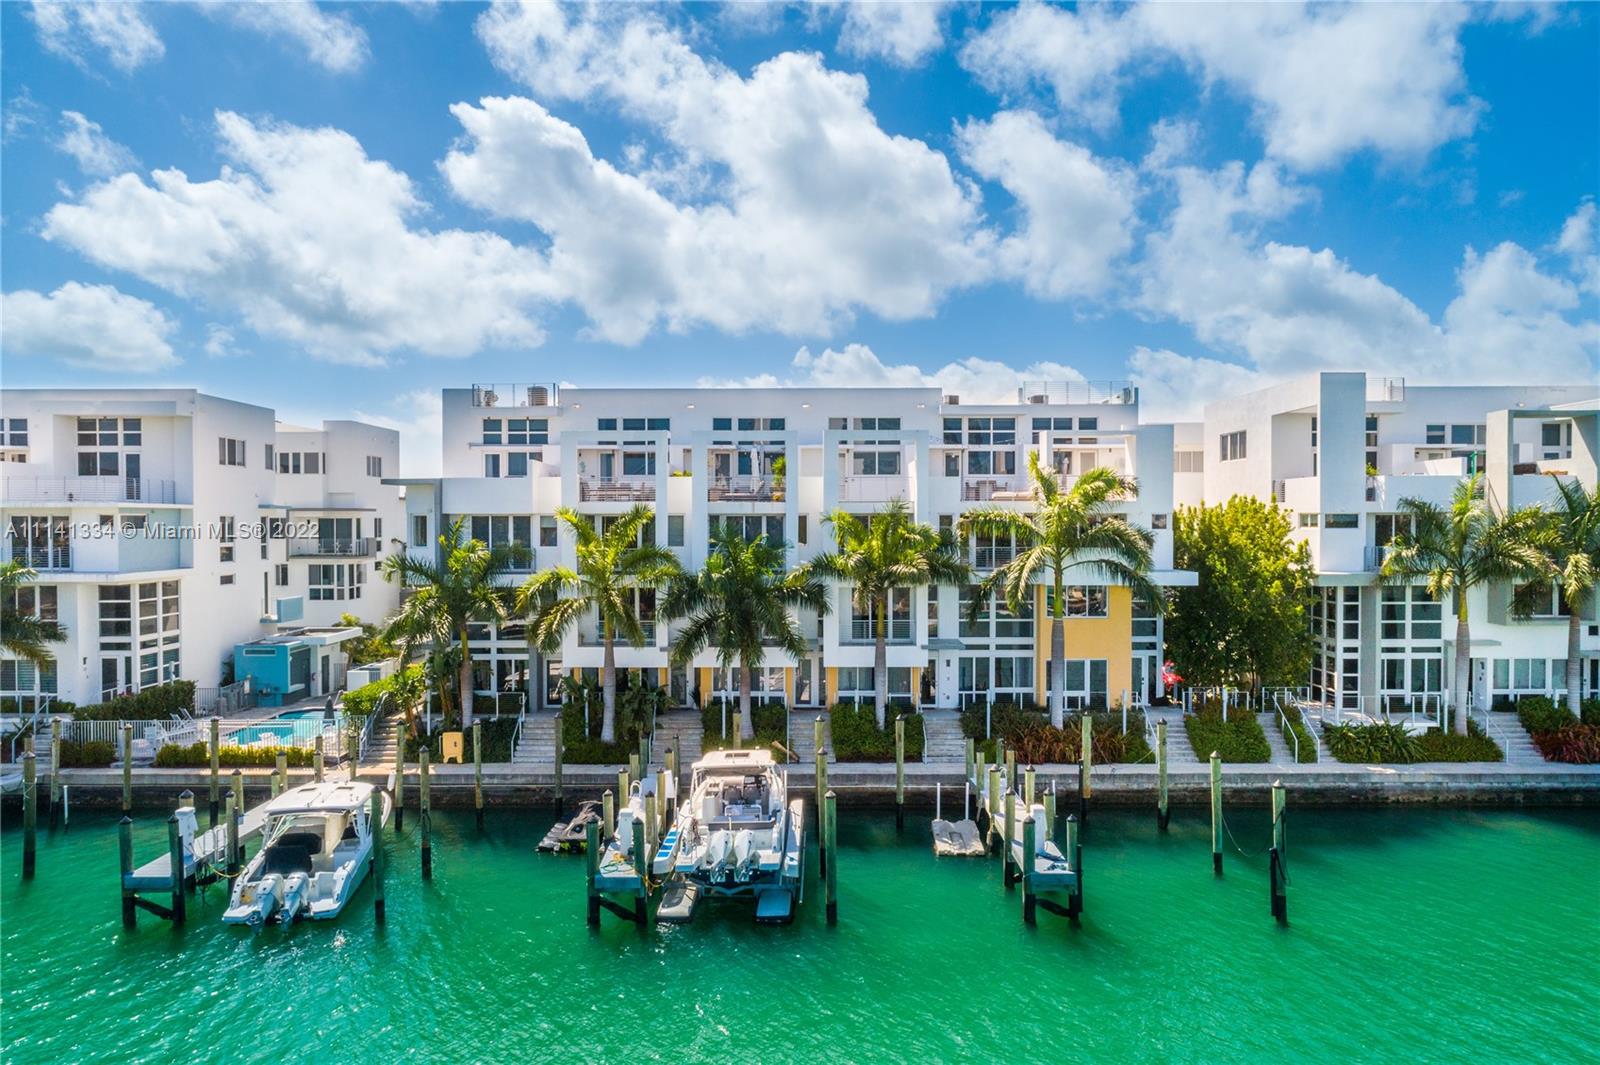 Built in 2016, Live the Miami dream in this beautiful 4 story waterfront townhouse. Located in Iris On The Bay featuring 3 bedrooms with private balconies, 3.5 bathrooms, private elevator, modern European kitchen, laundry room, rooftop terrace with plenty of space, and spacious 2 car garage. The specific location of this unit provides more open water views. Water access is only within a few steps from your door to the dock. The private elevator provides amazing convenience for all floors within the home. The property is located a few blocks from beach, across from normandy golf course, tennis courts, children's playground, soccer field, restaurants, and shopping.